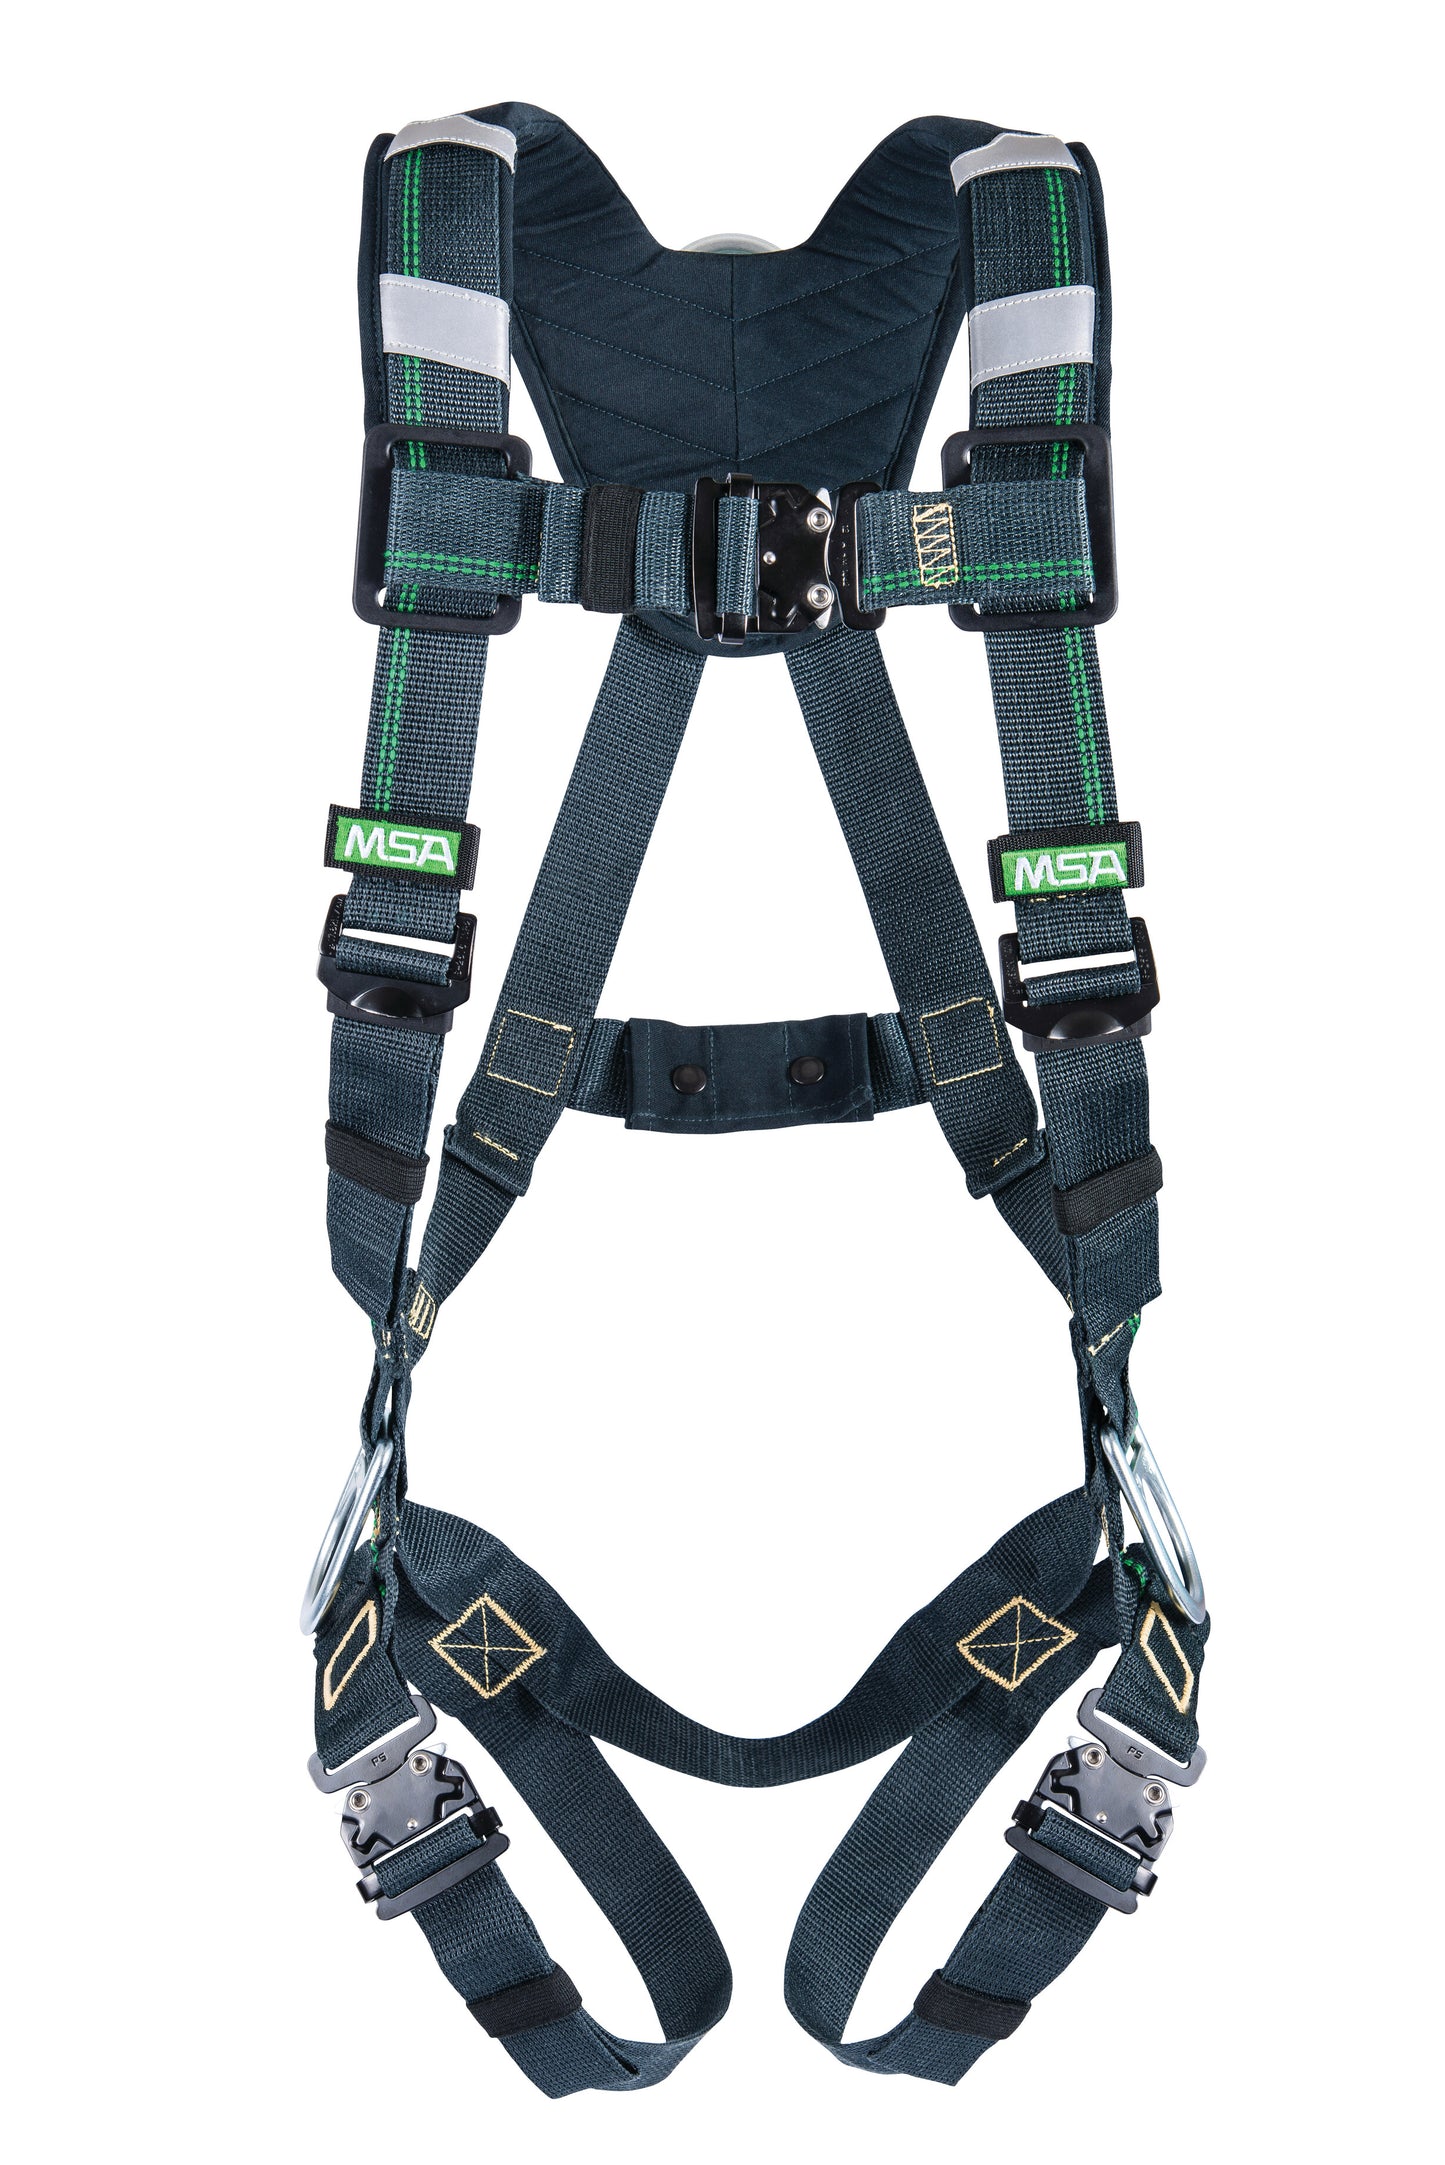 EVOTECH Arc Flash Harness, Fall Protection Harness With Shoulder Padding